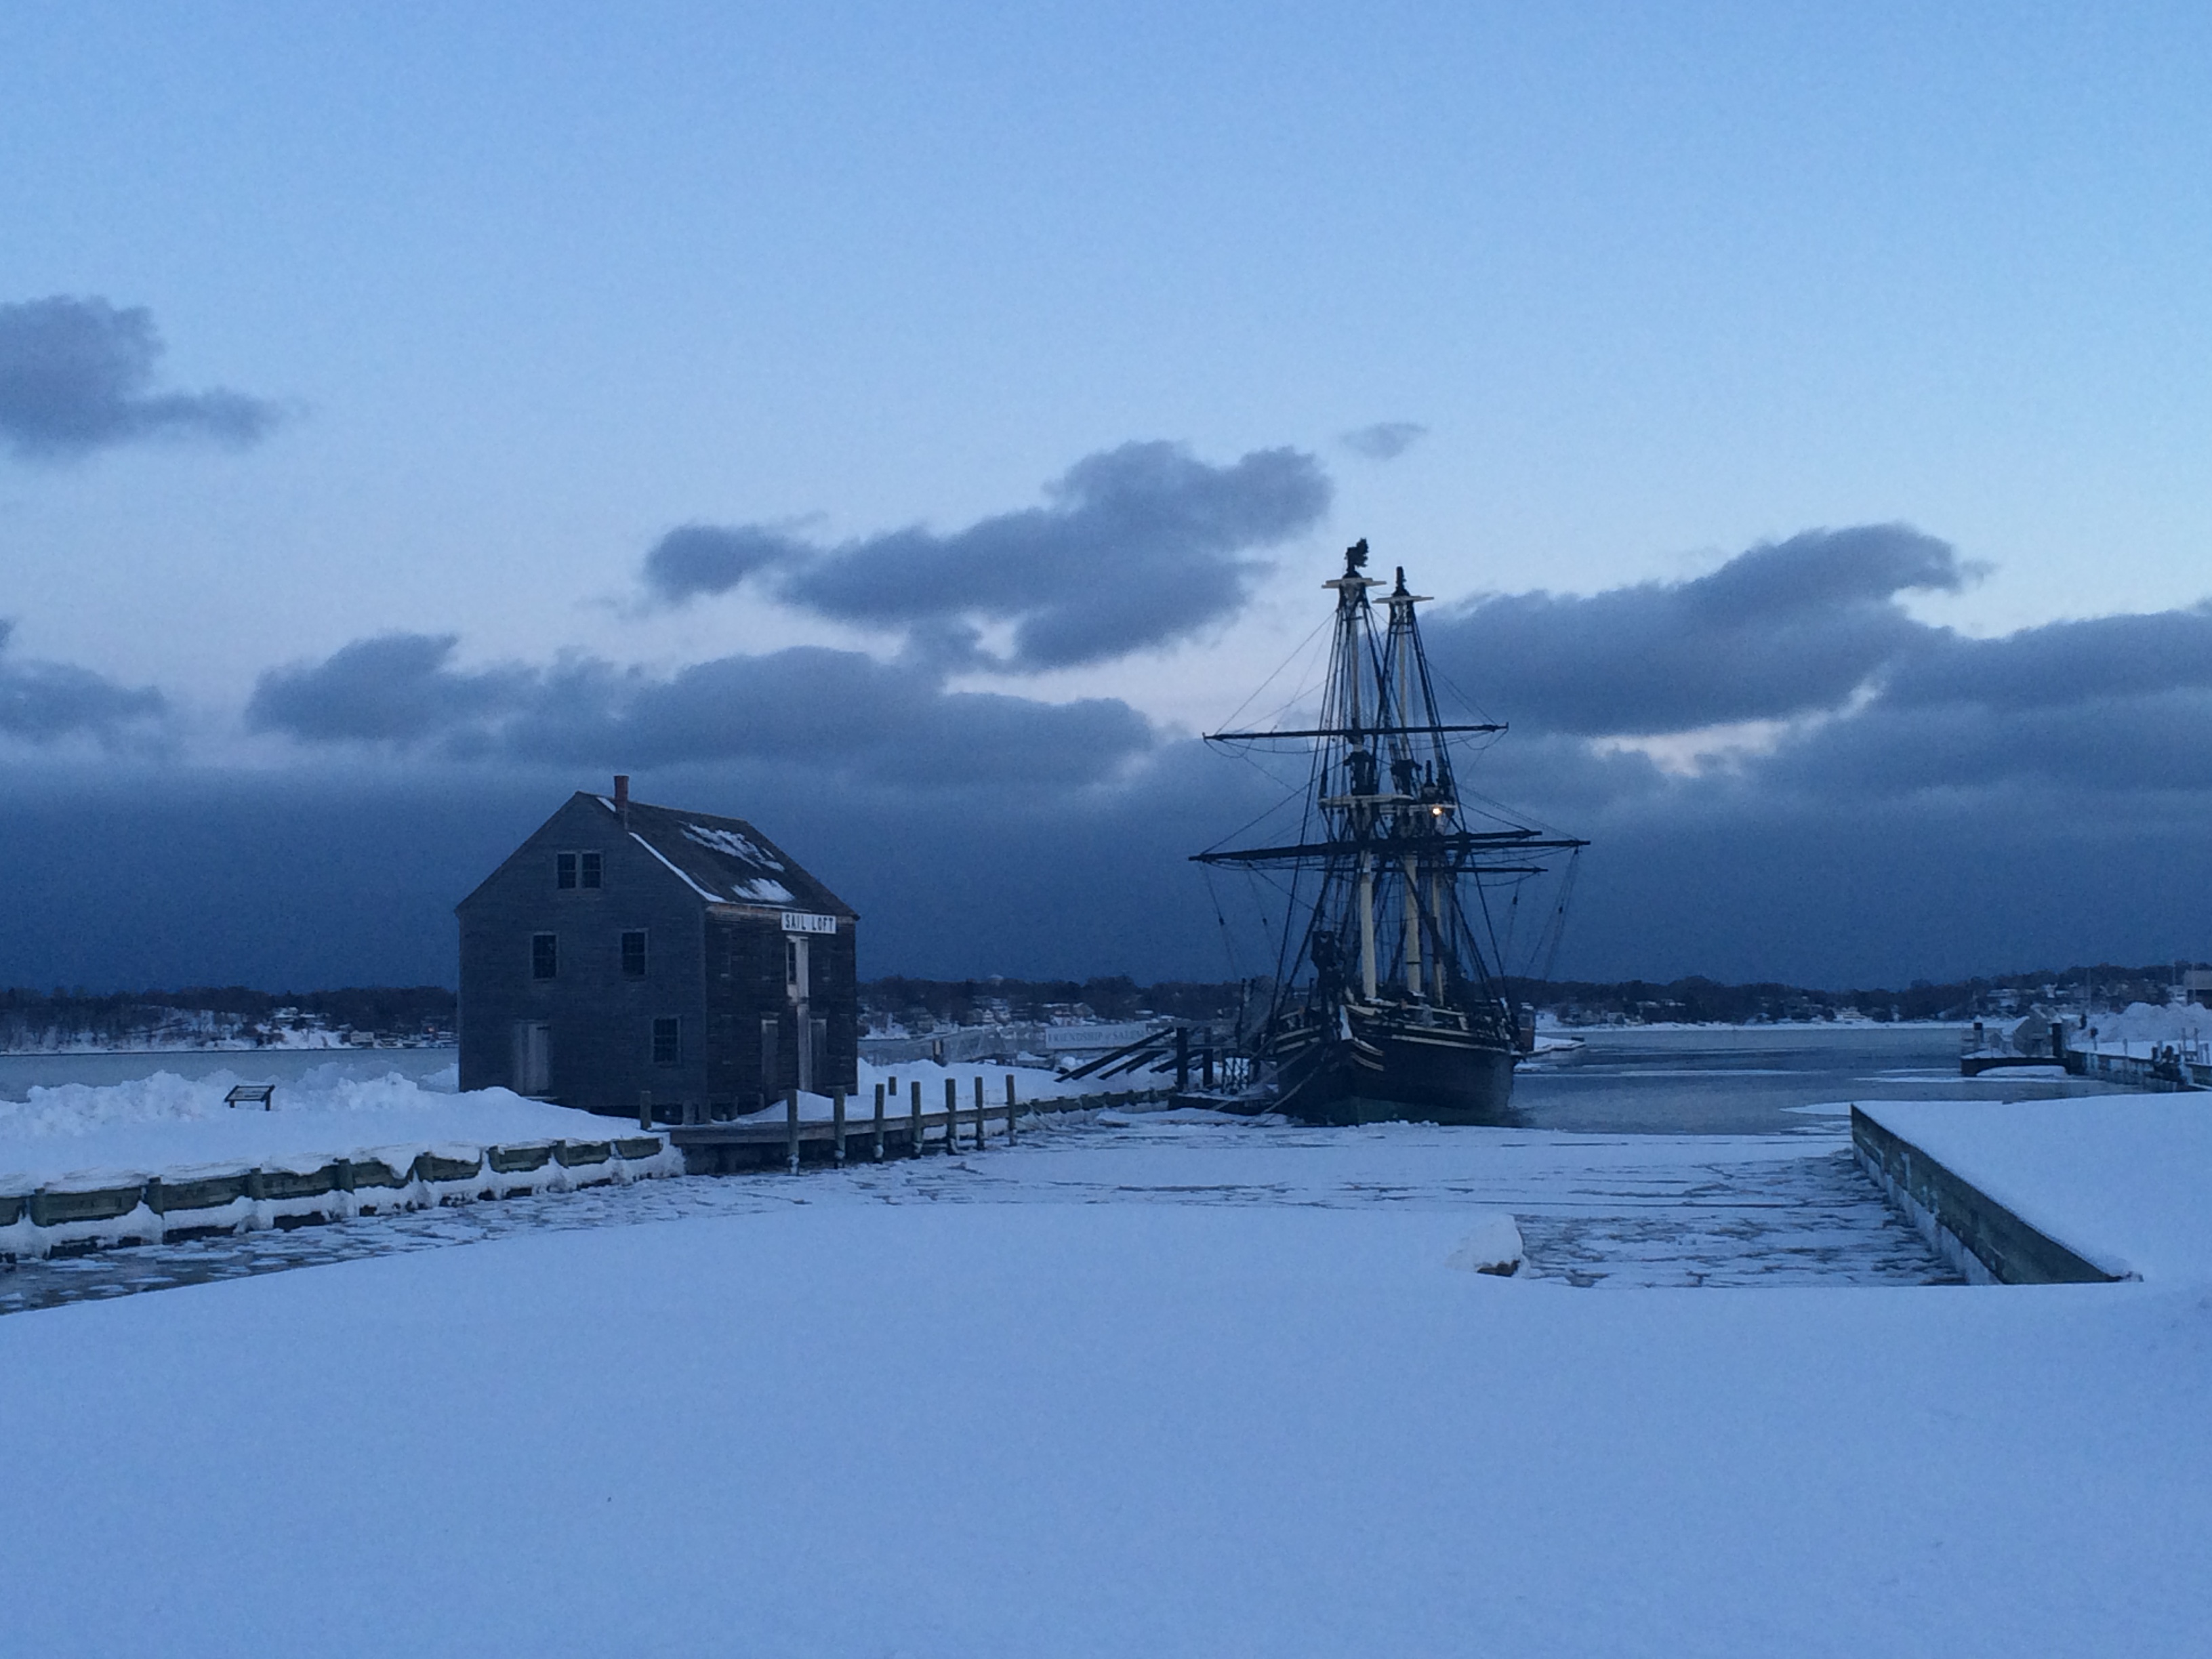 The friendship of salem docked at dusk in the winter, snow coats the ground and floats on the water